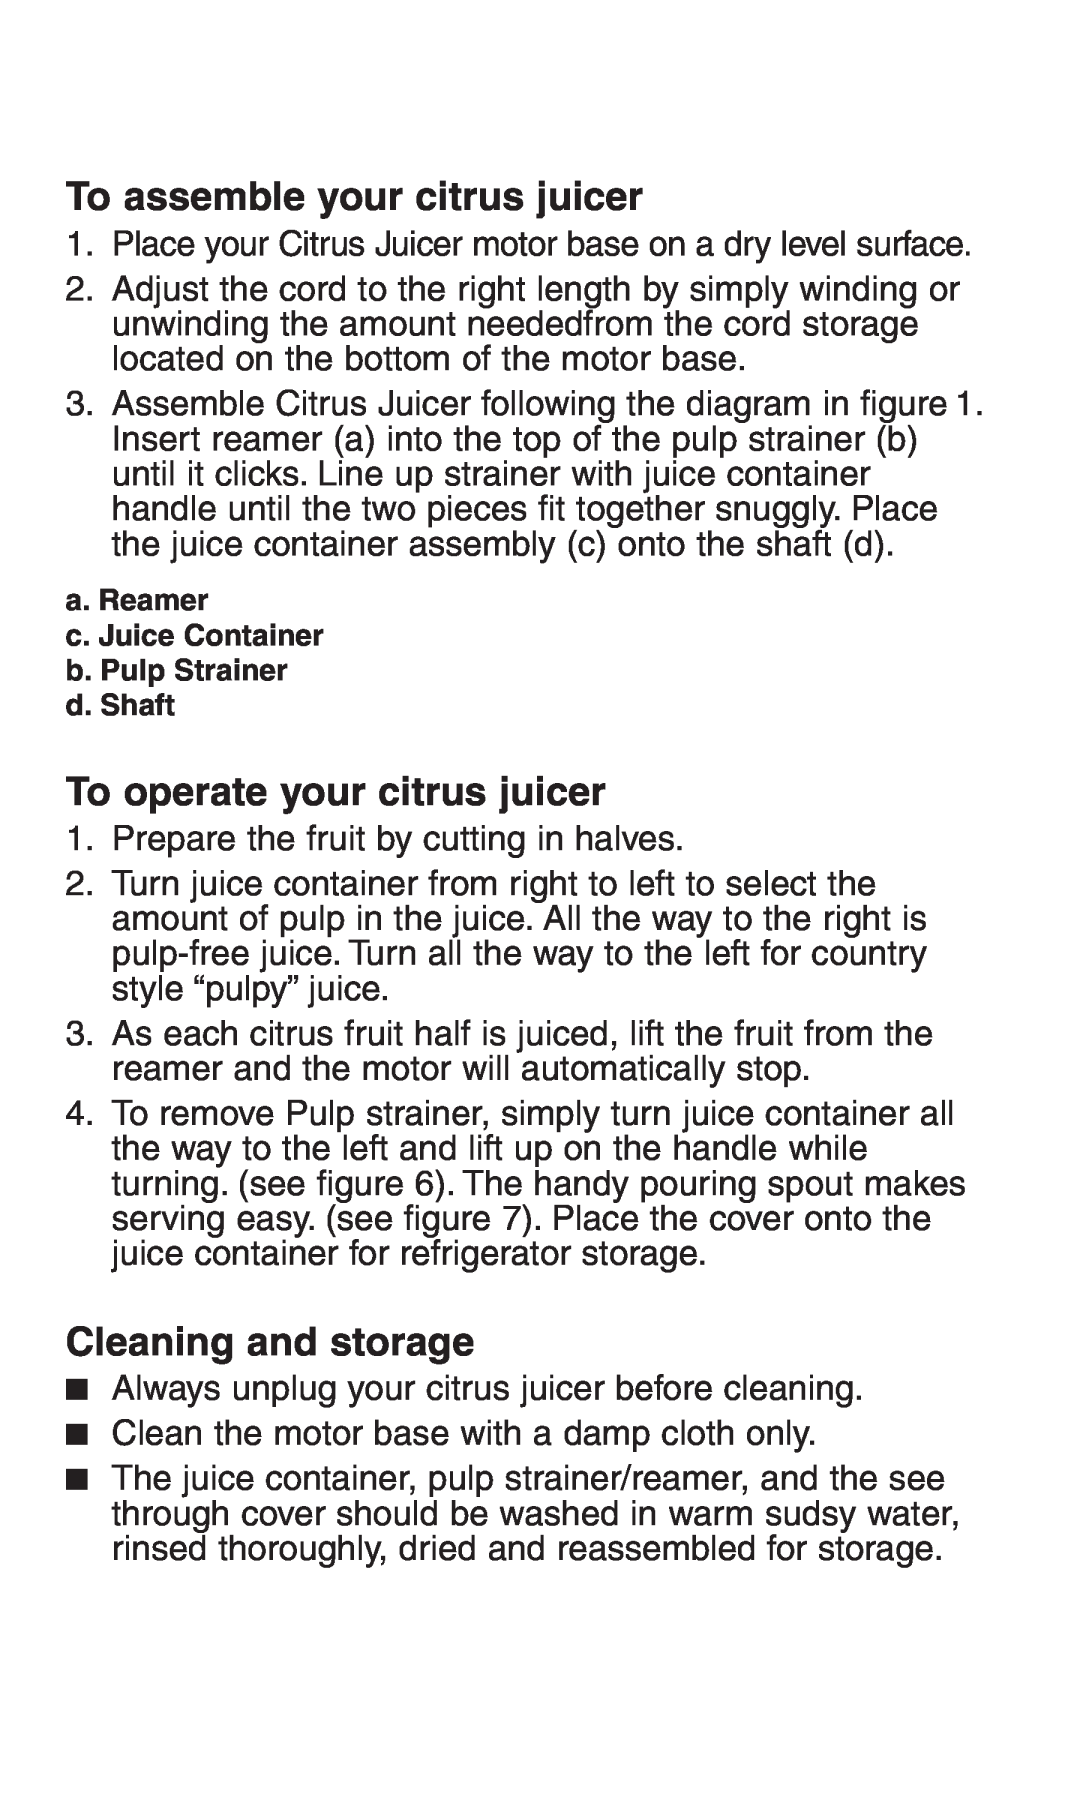 Continental Electric CE22671 manual To assemble your citrus juicer, To operate your citrus juicer, Cleaning and storage 